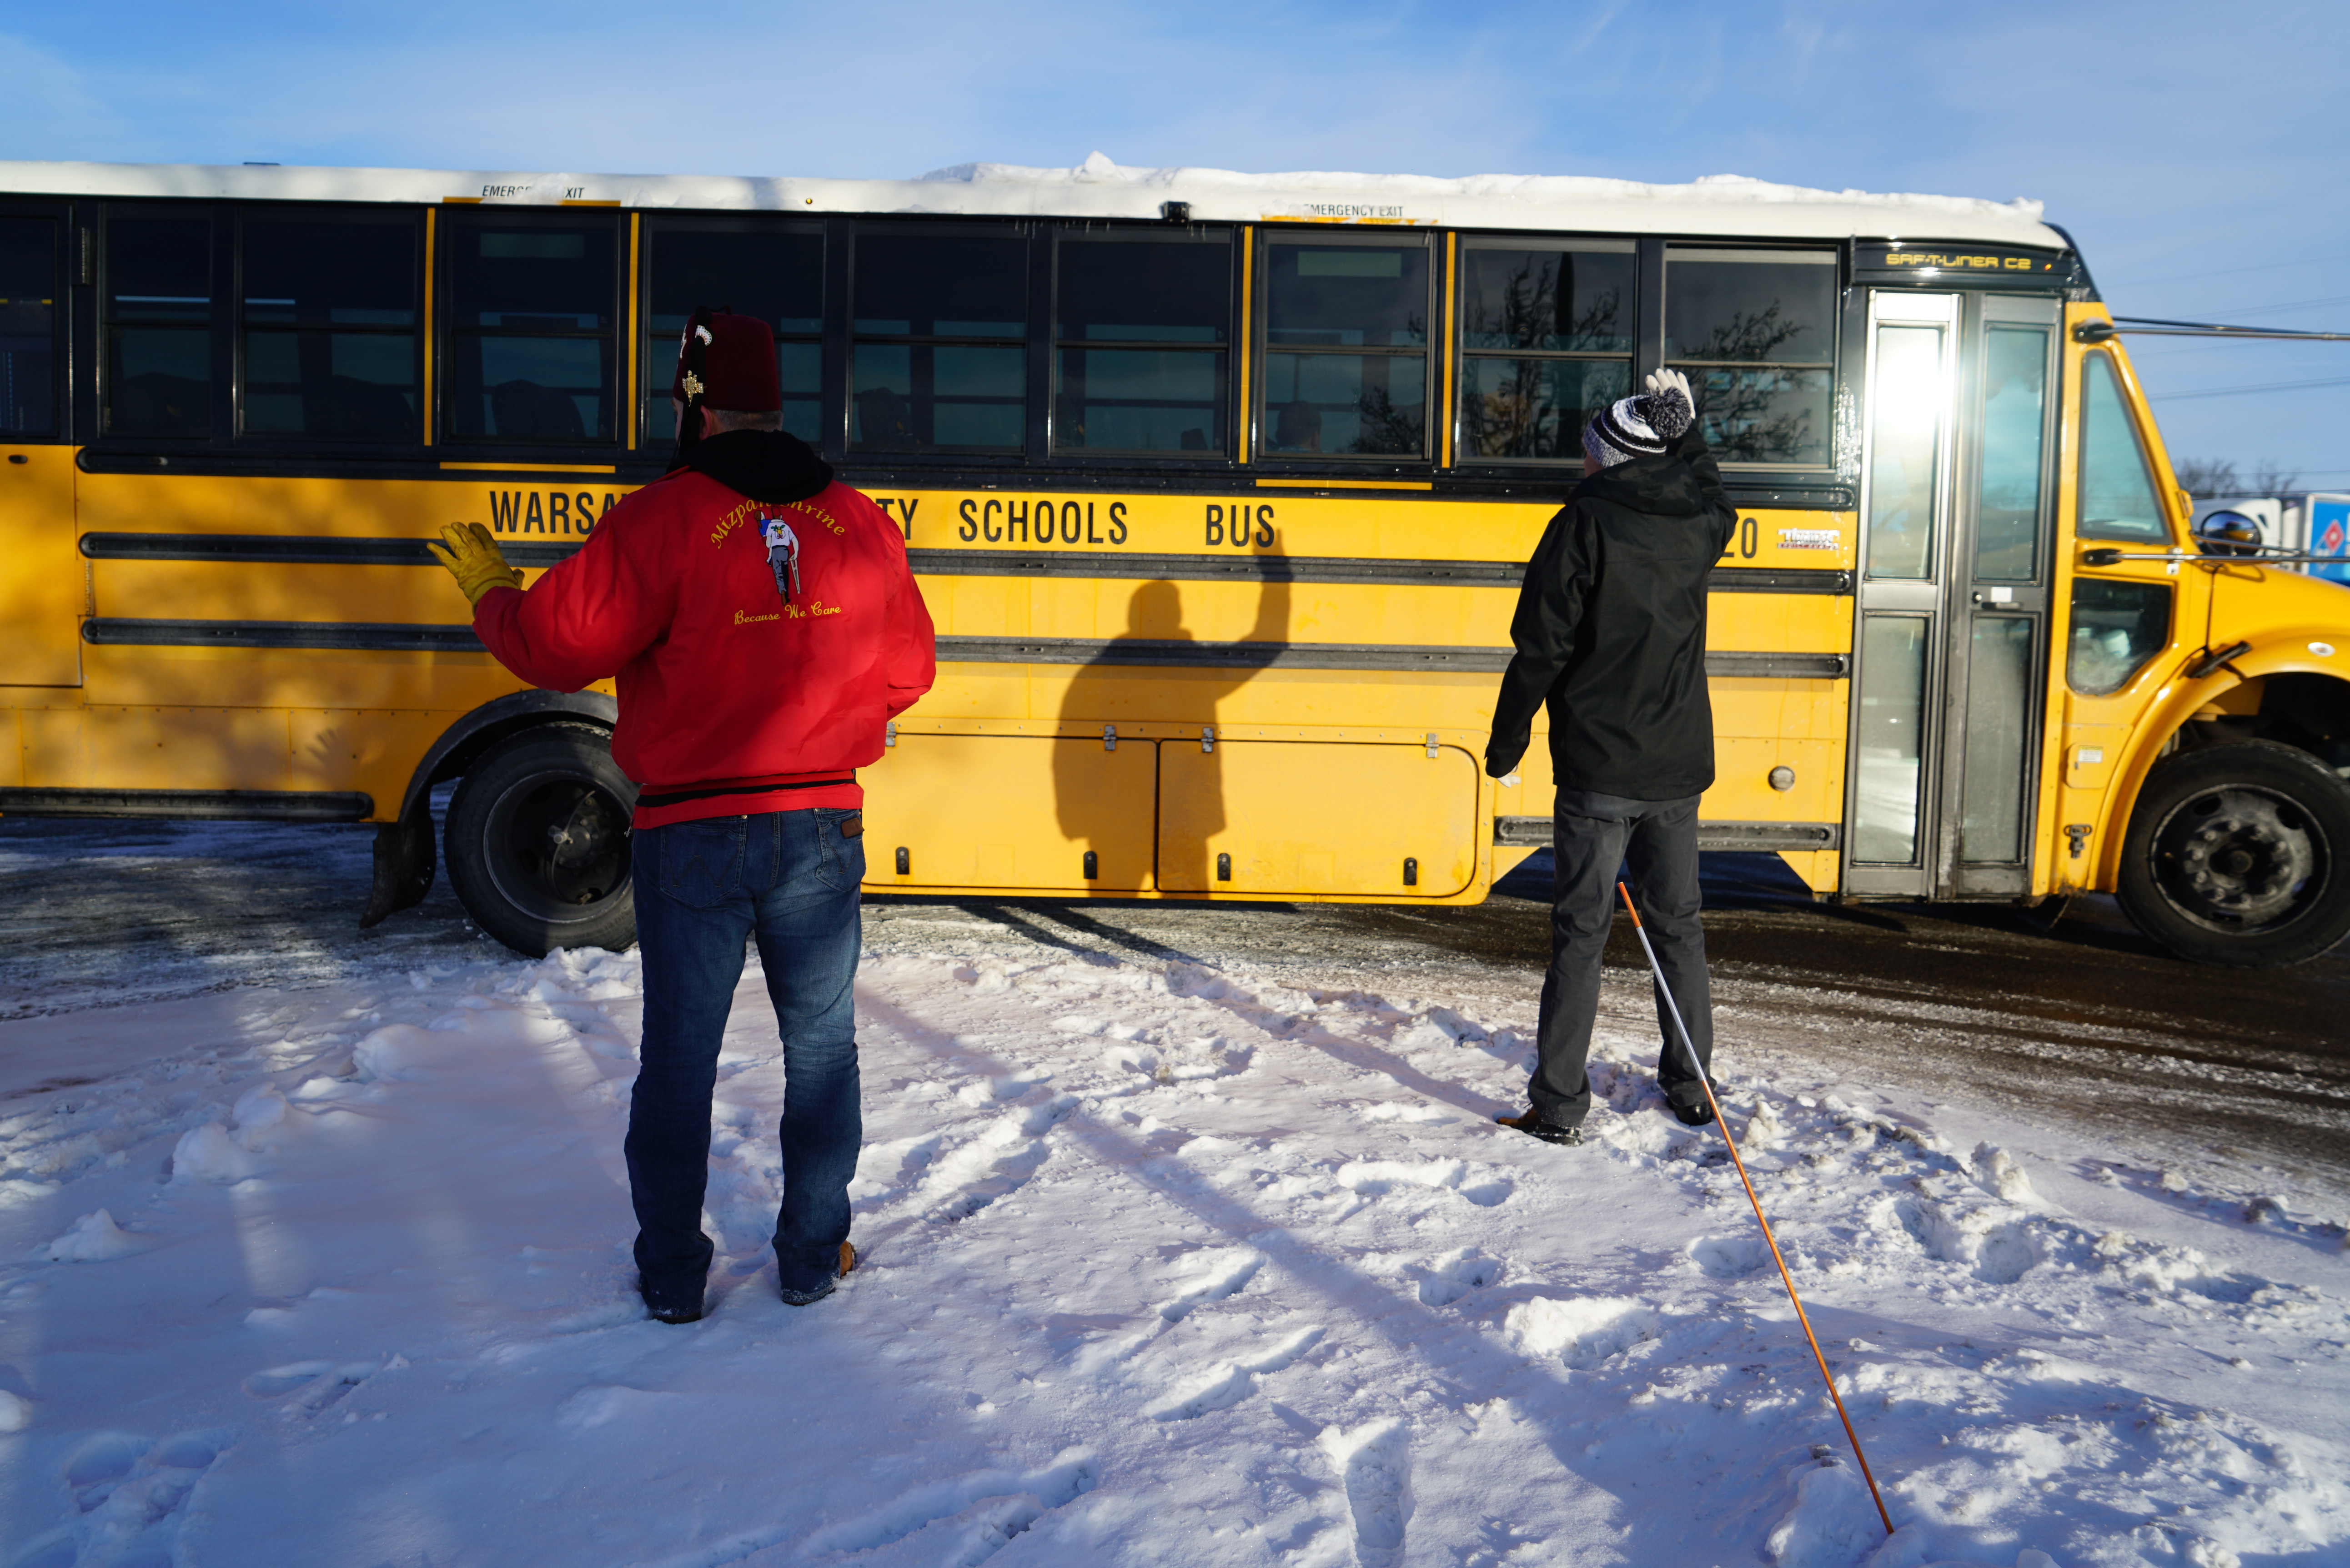 Two adults stand and wave at a warsaw school bus in the snow